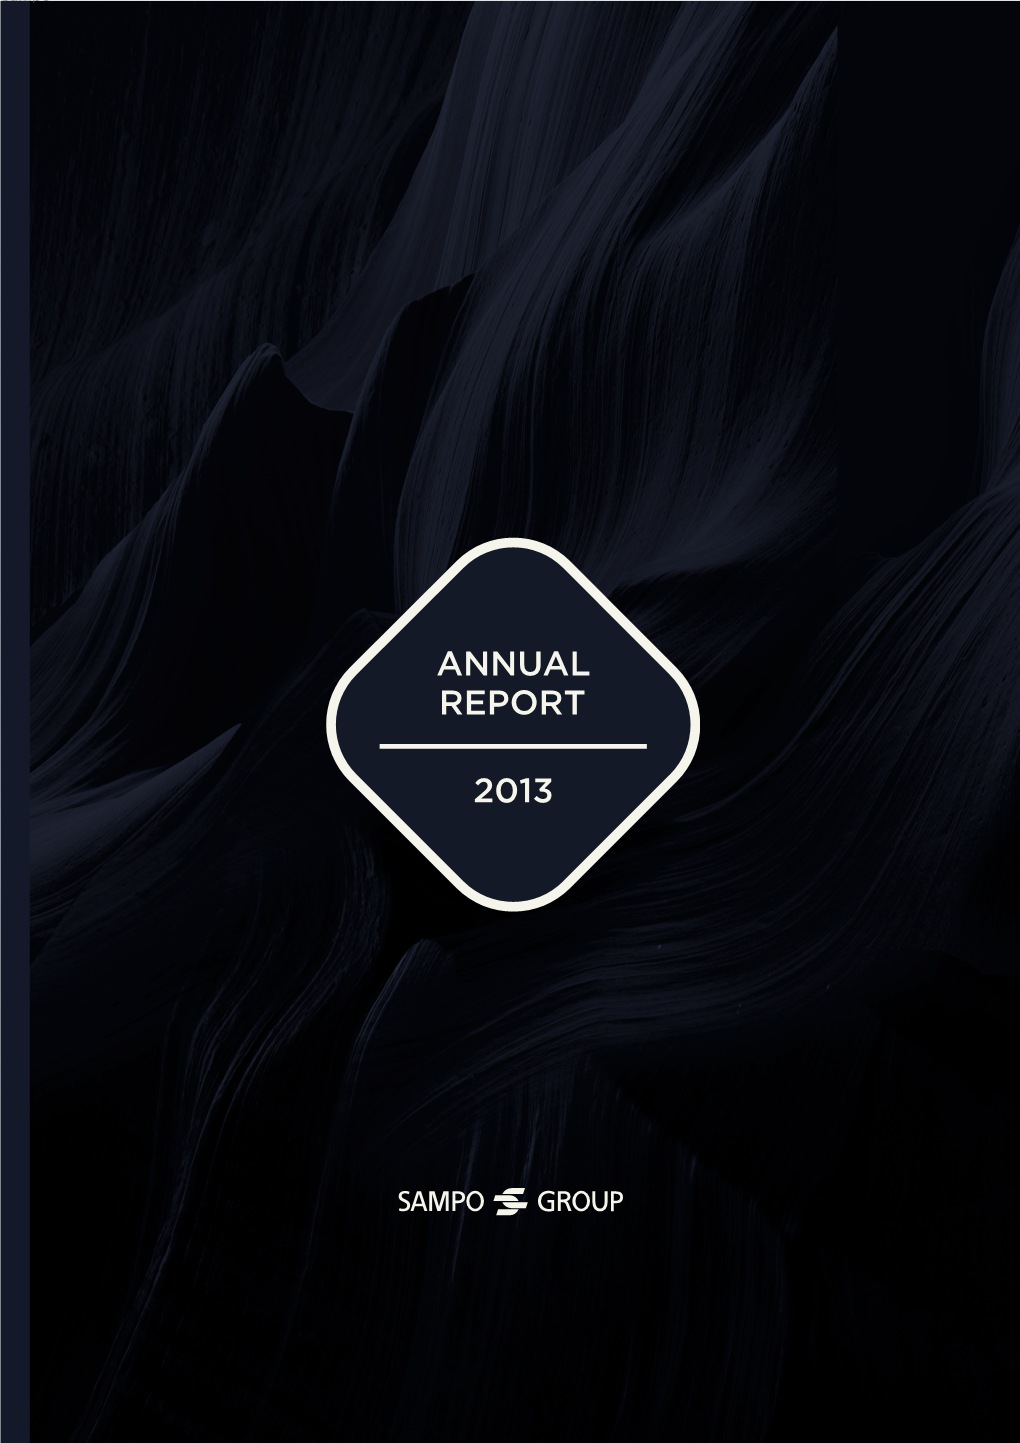 Sampo Group / Annual Report 2013